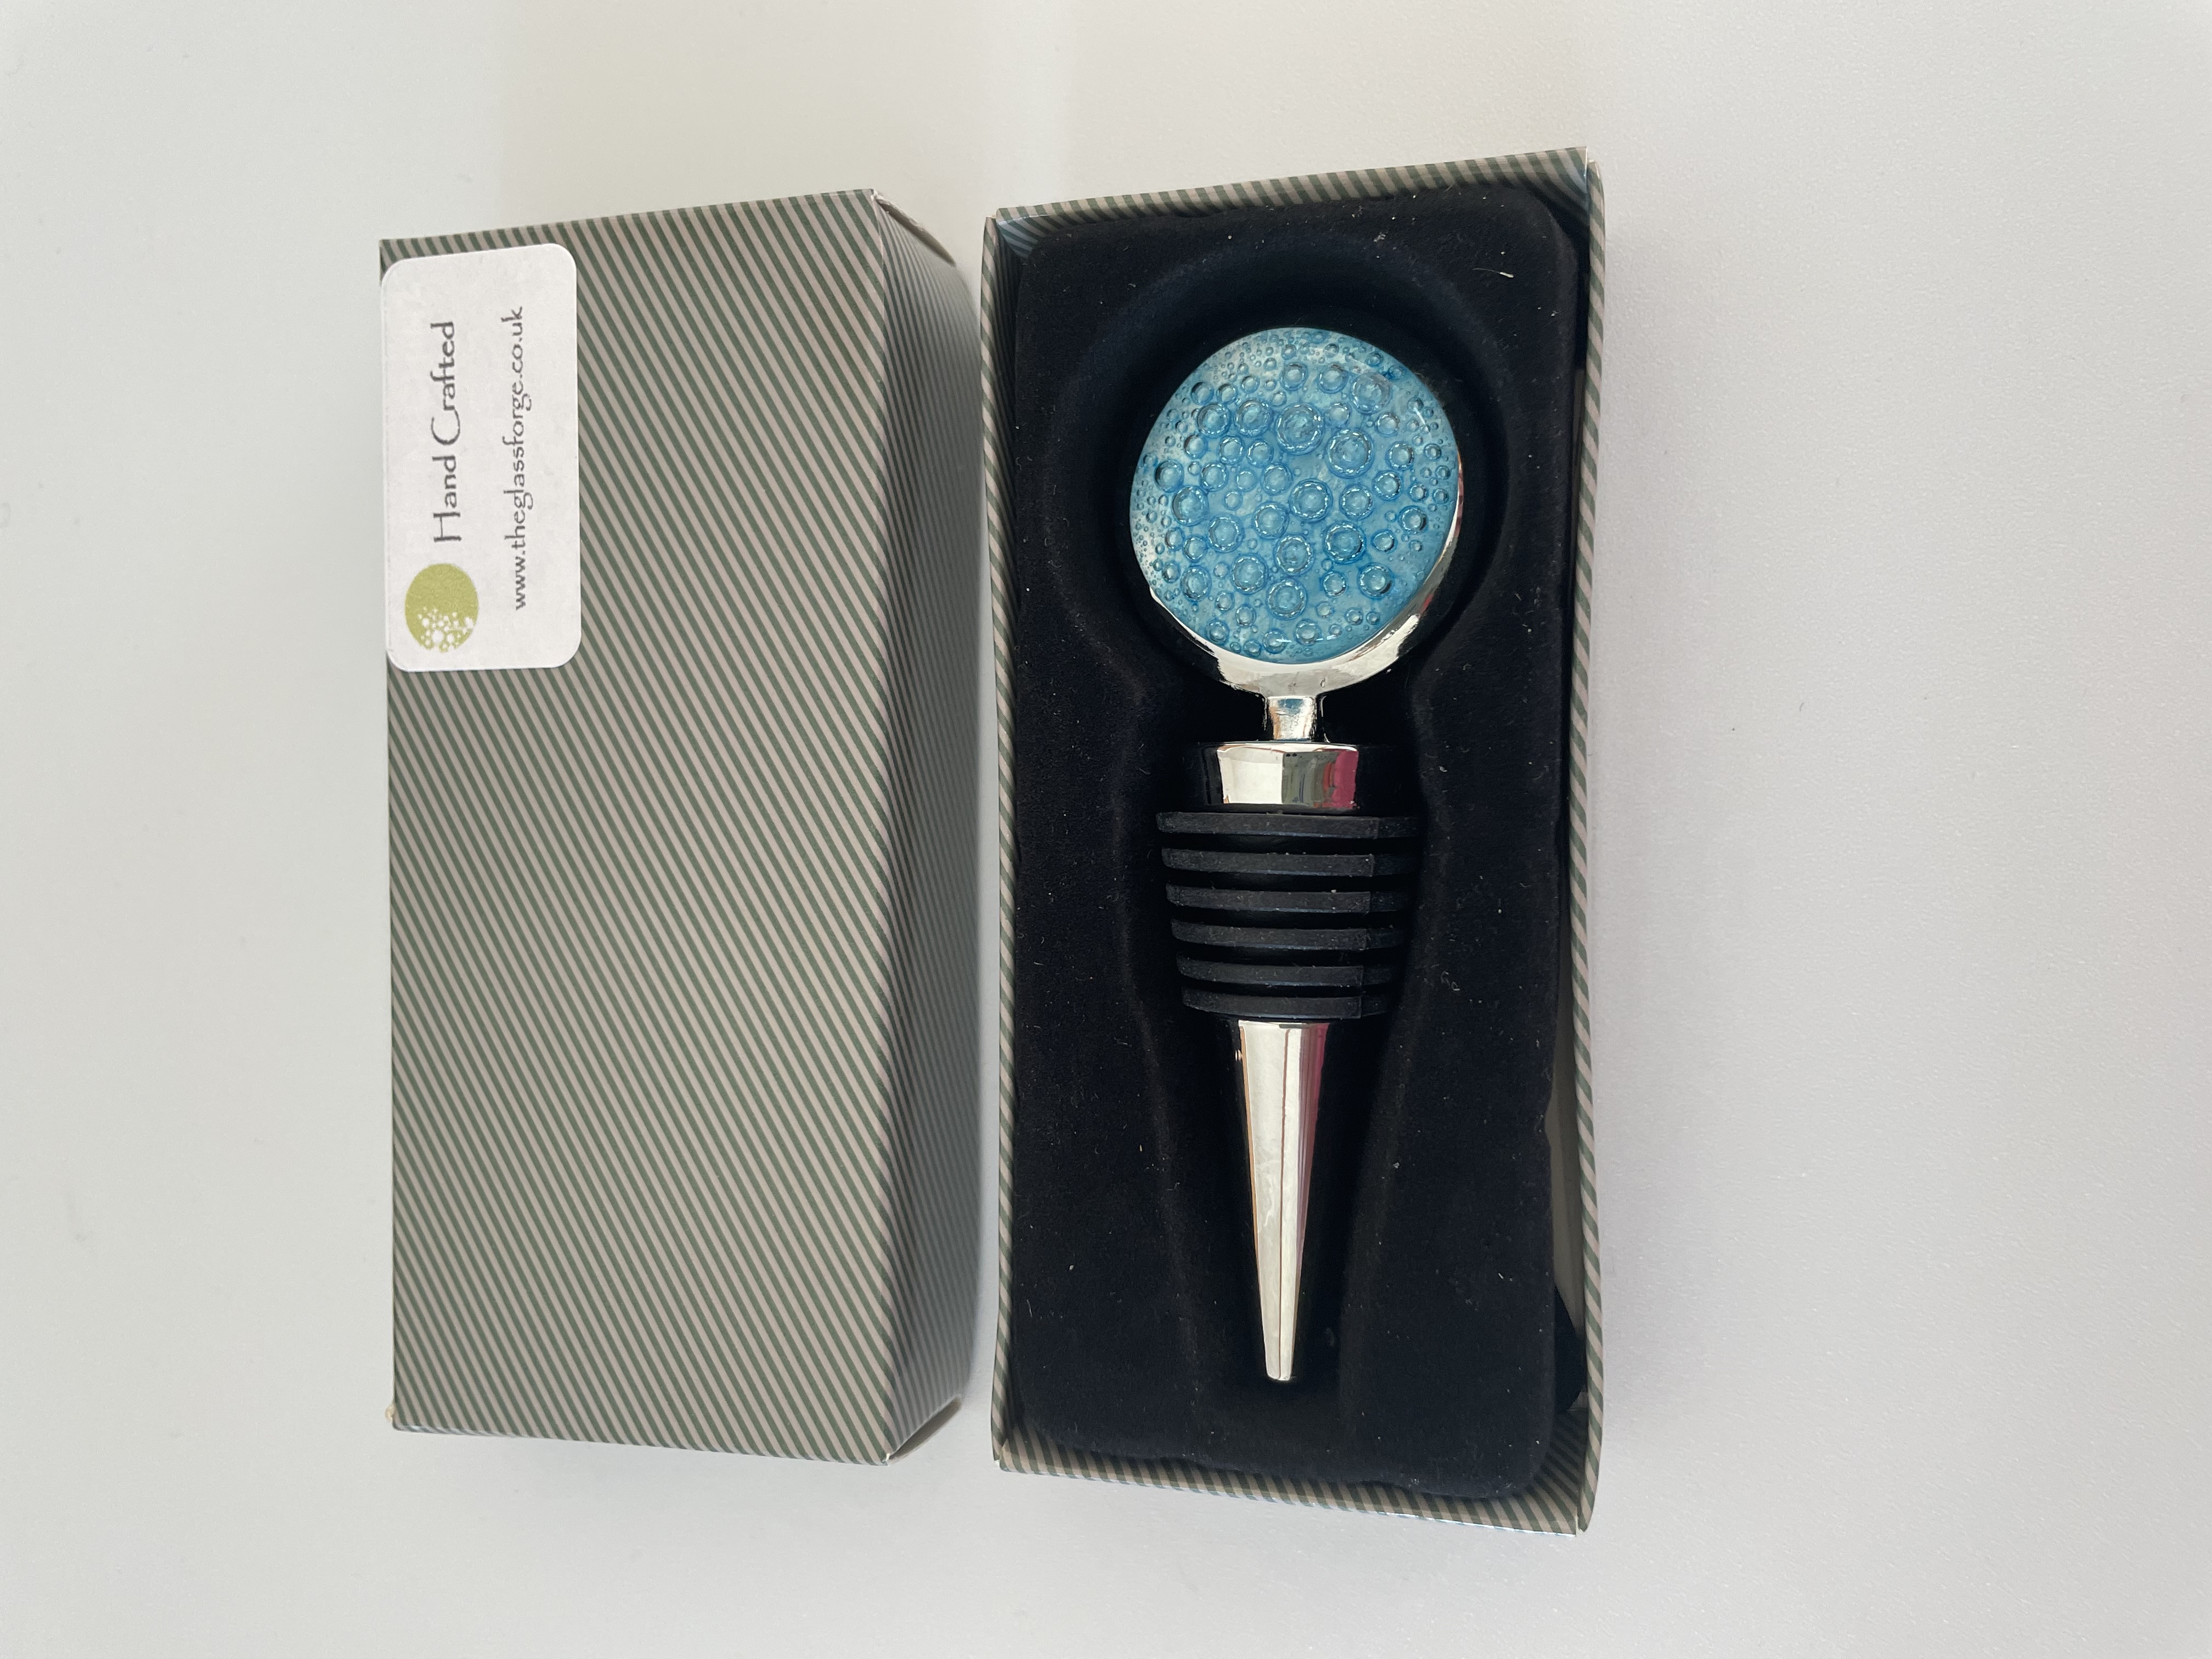 Fused Glass Wine Stopper